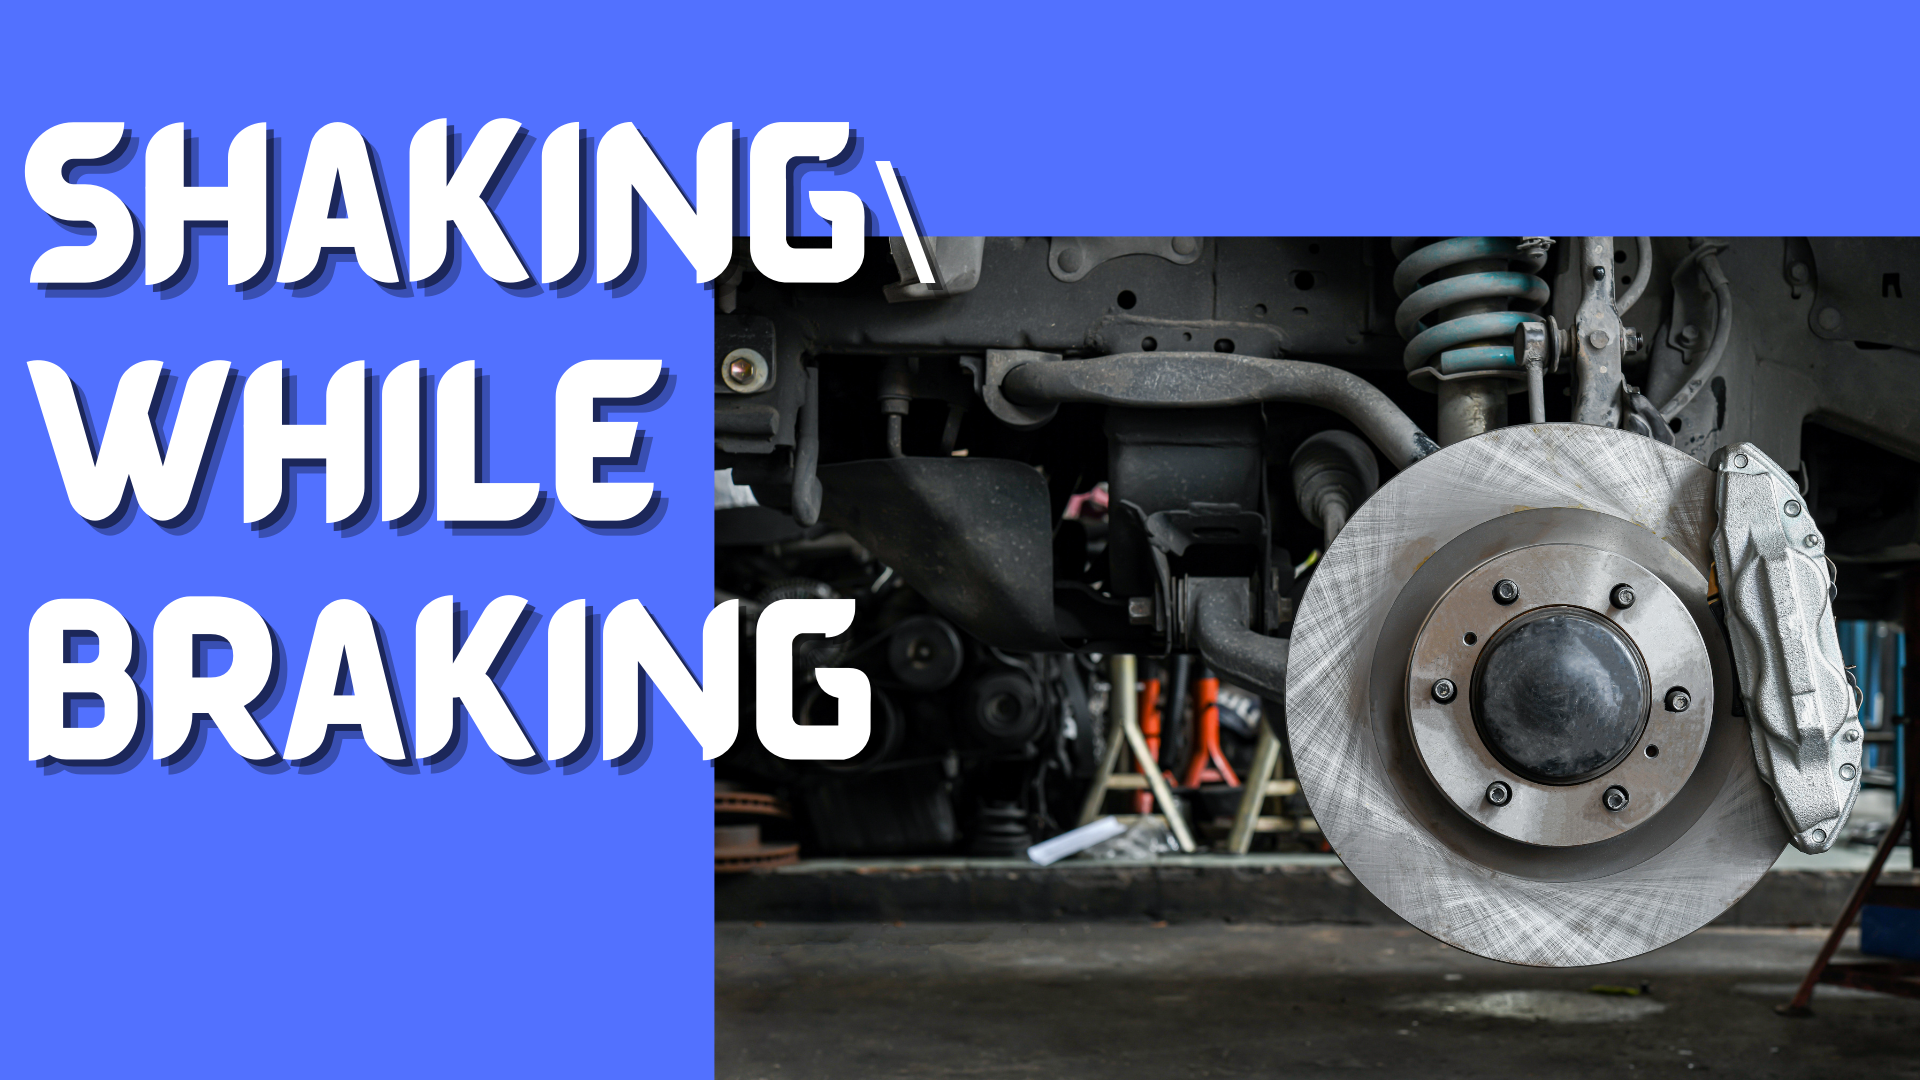 The truck is Shaking While Braking – Causes